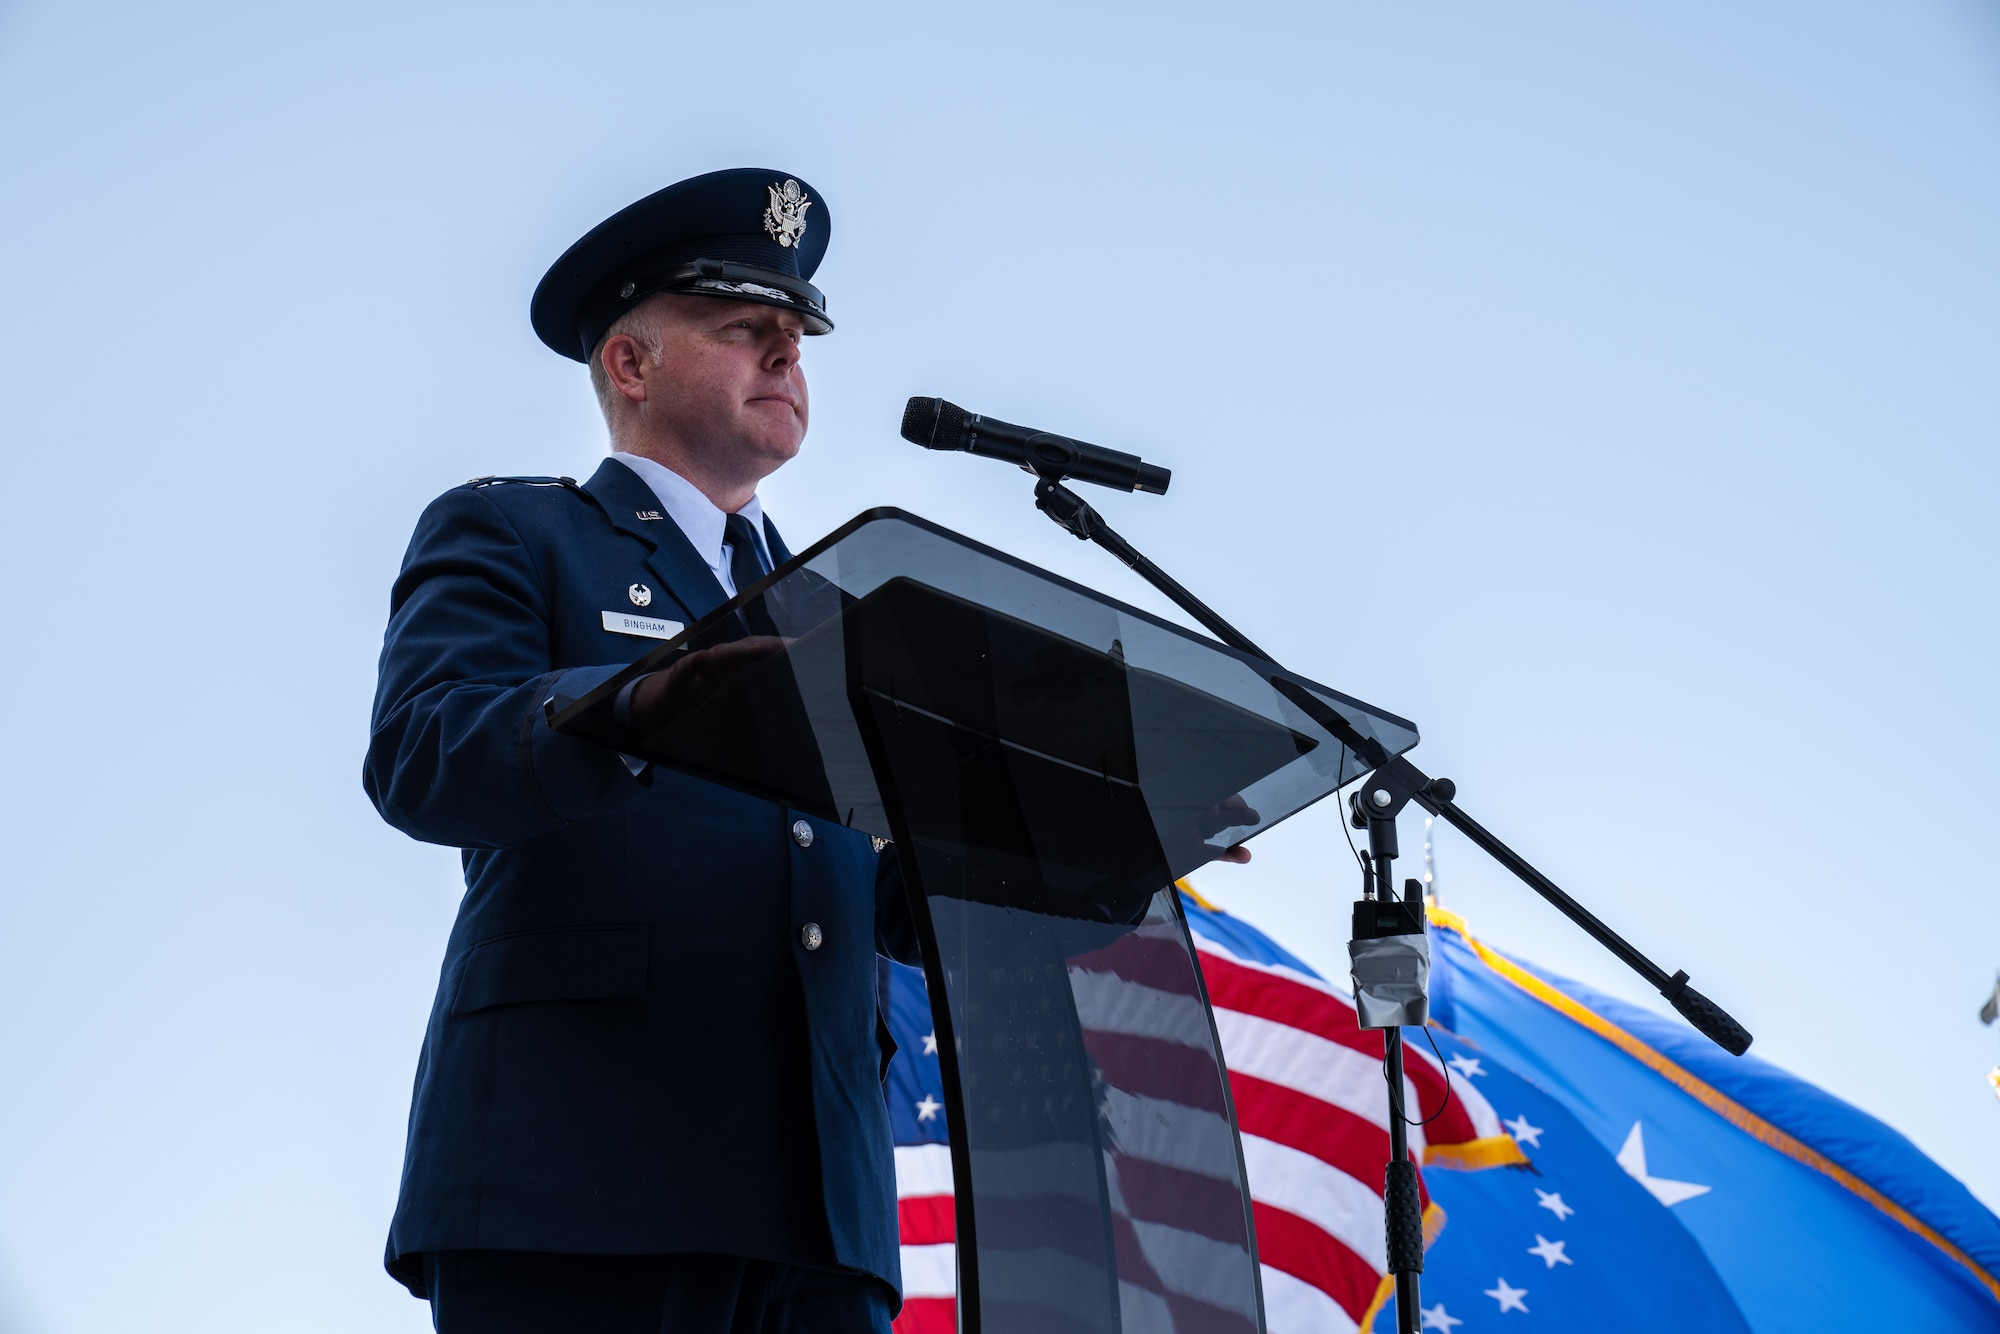 U.S. Air Force Col. Adam Bingham, 6th Air Refueling Wing commander, speaks during the 6th ARW change of command ceremony at MacDill Air Force Base, Florida, July 29, 2022.